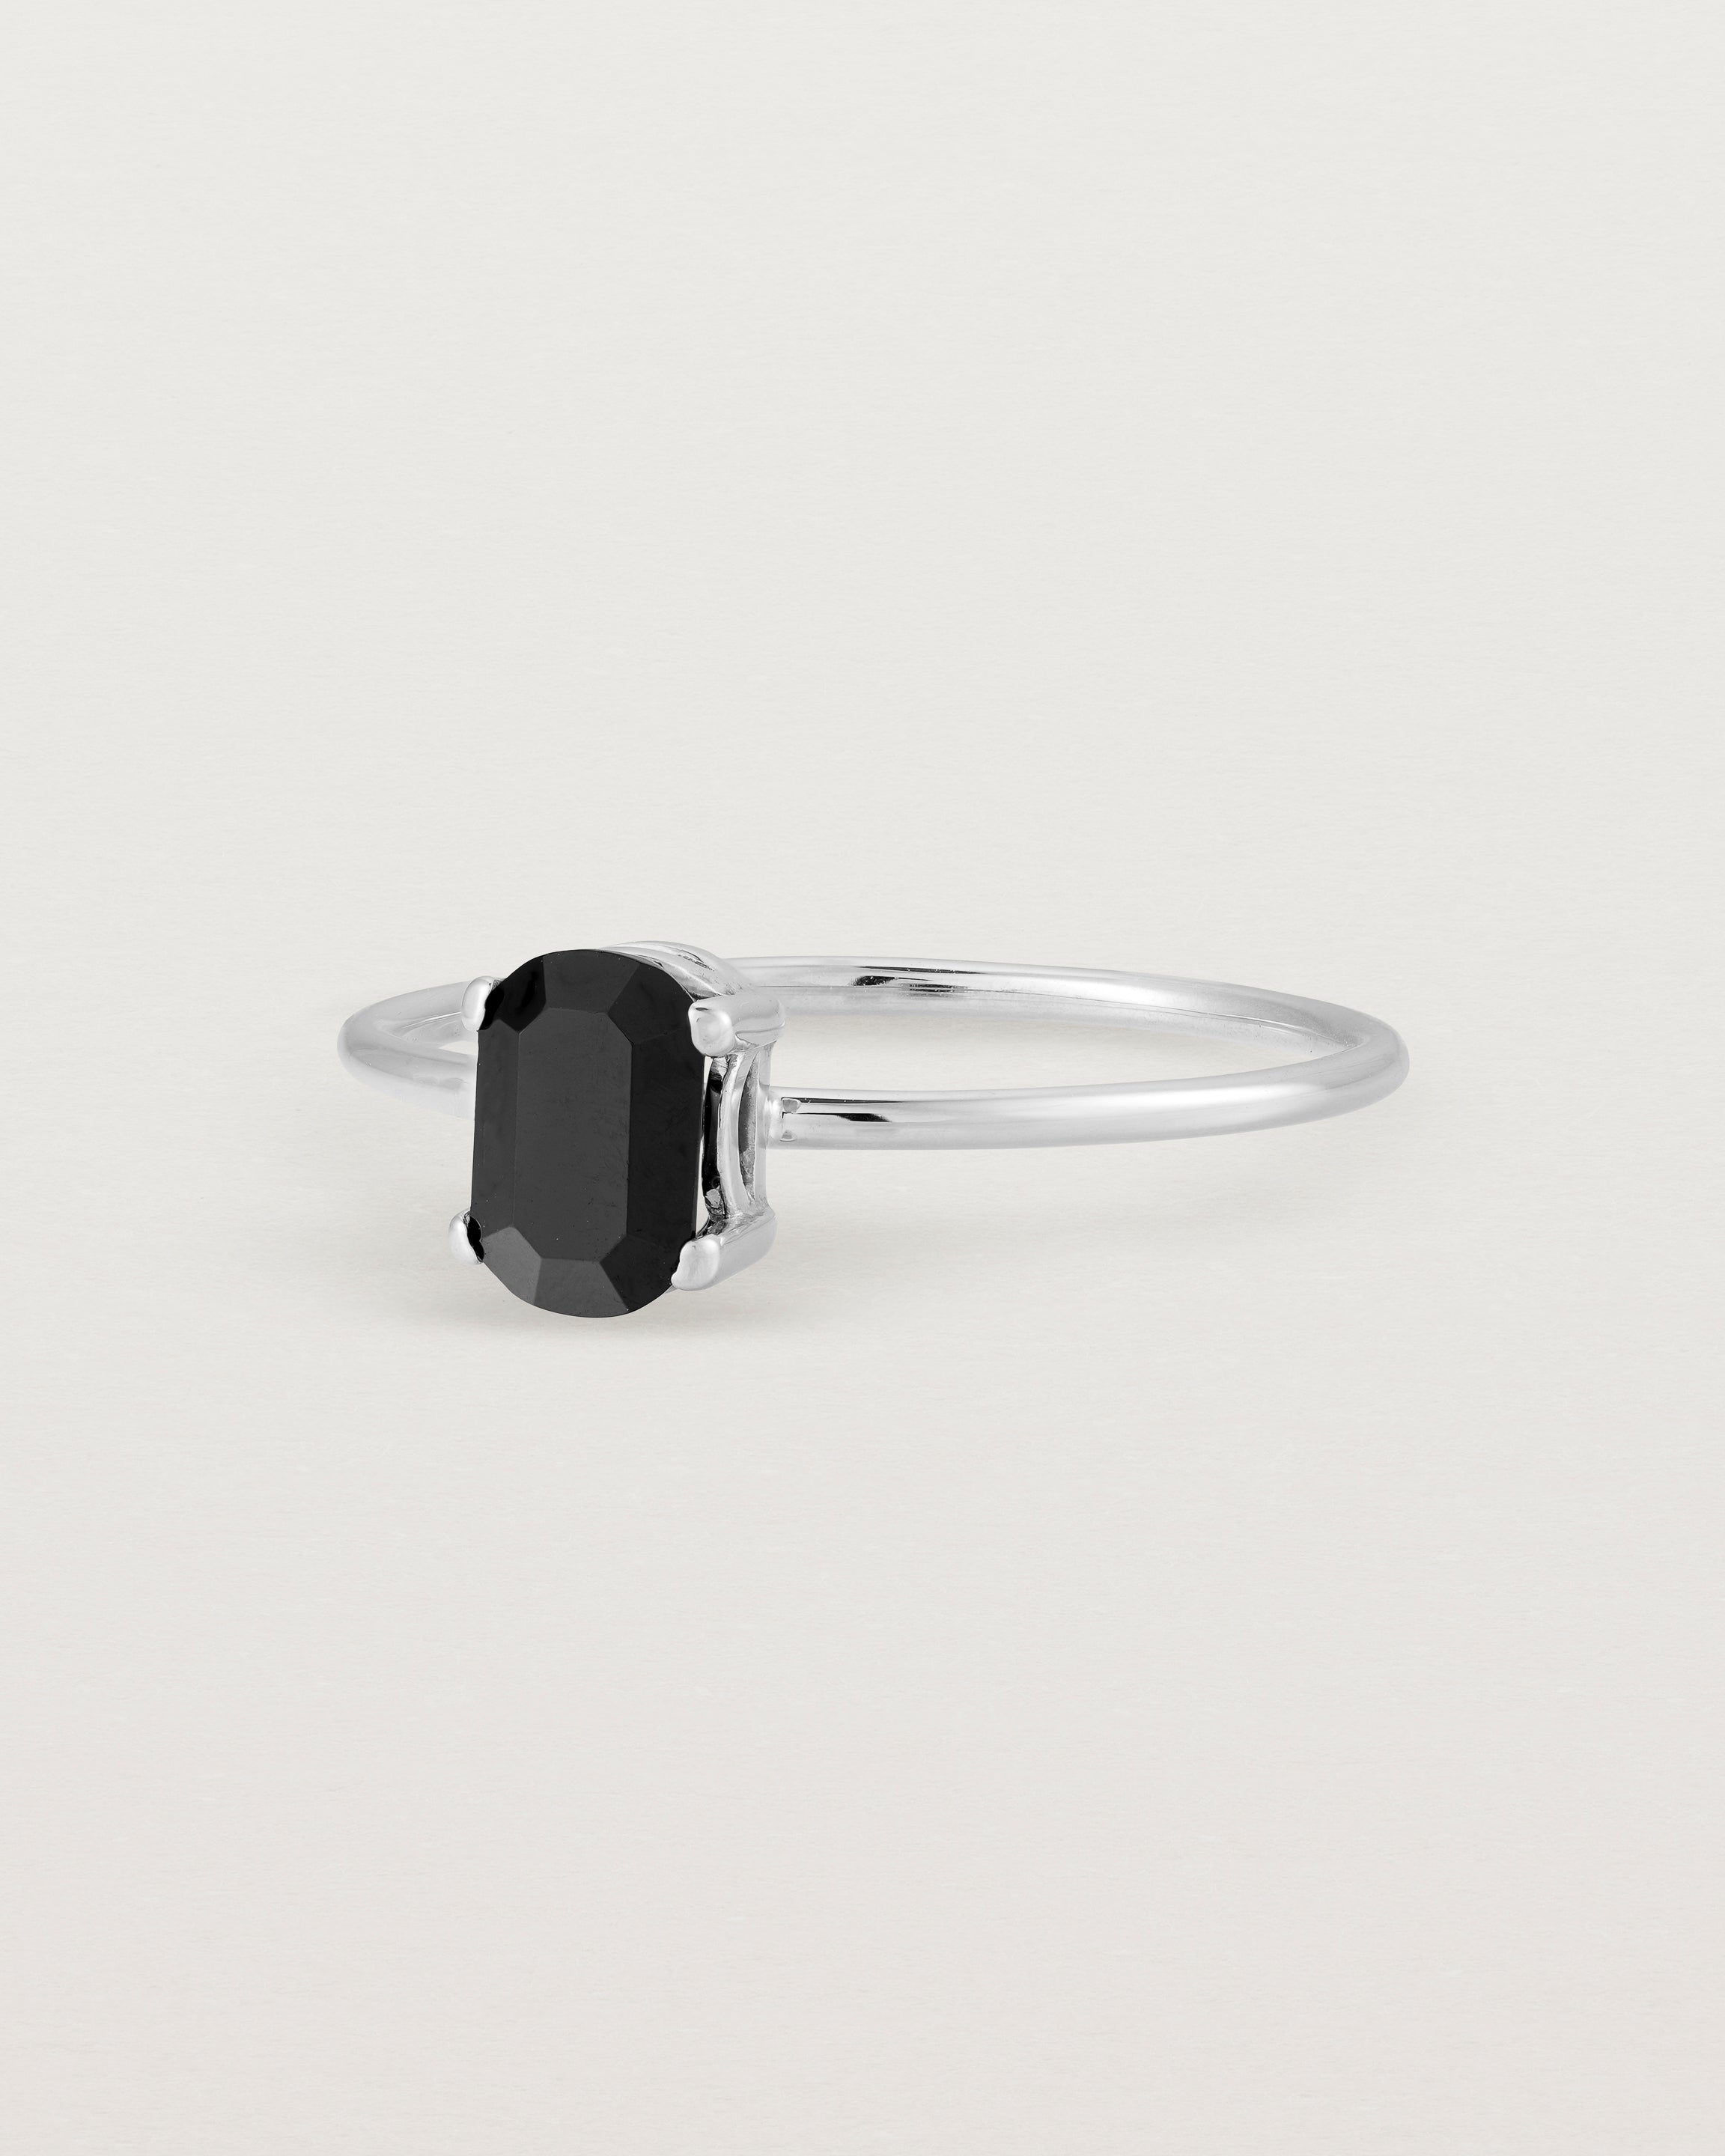 Fine sterling silver band featuring an oval black spinel stone